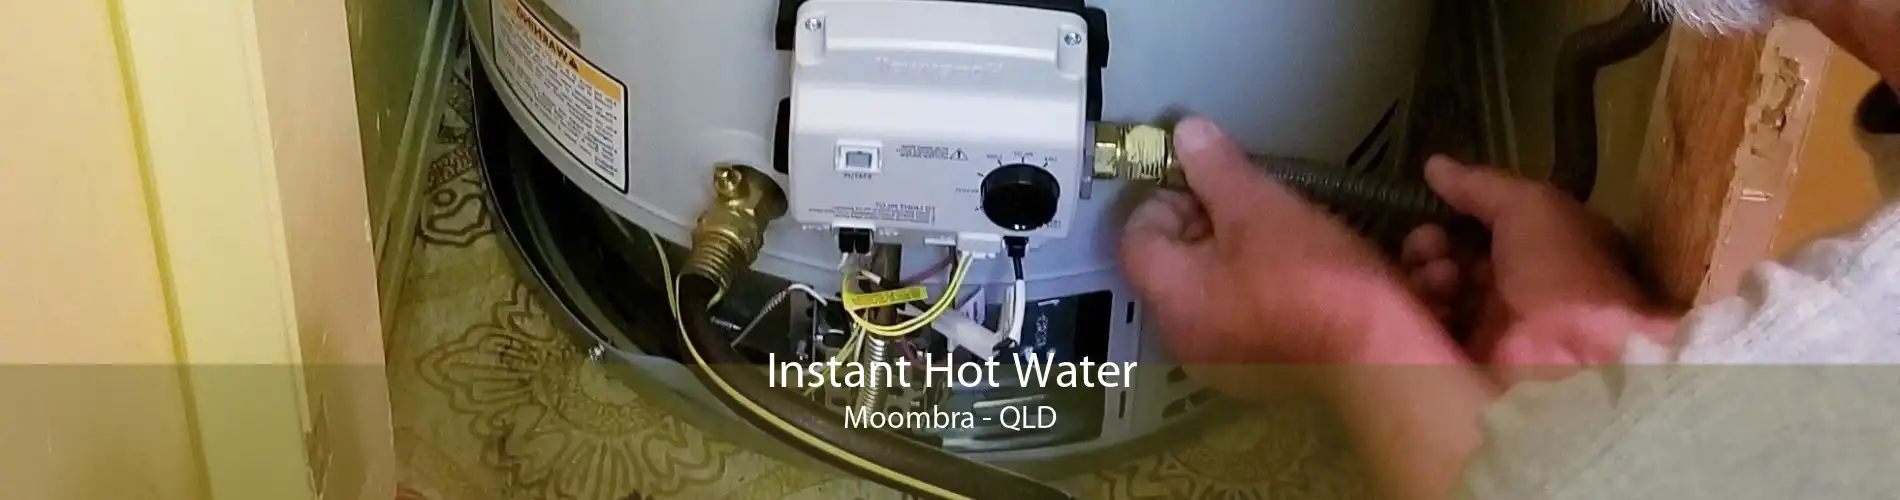 Instant Hot Water Moombra - QLD